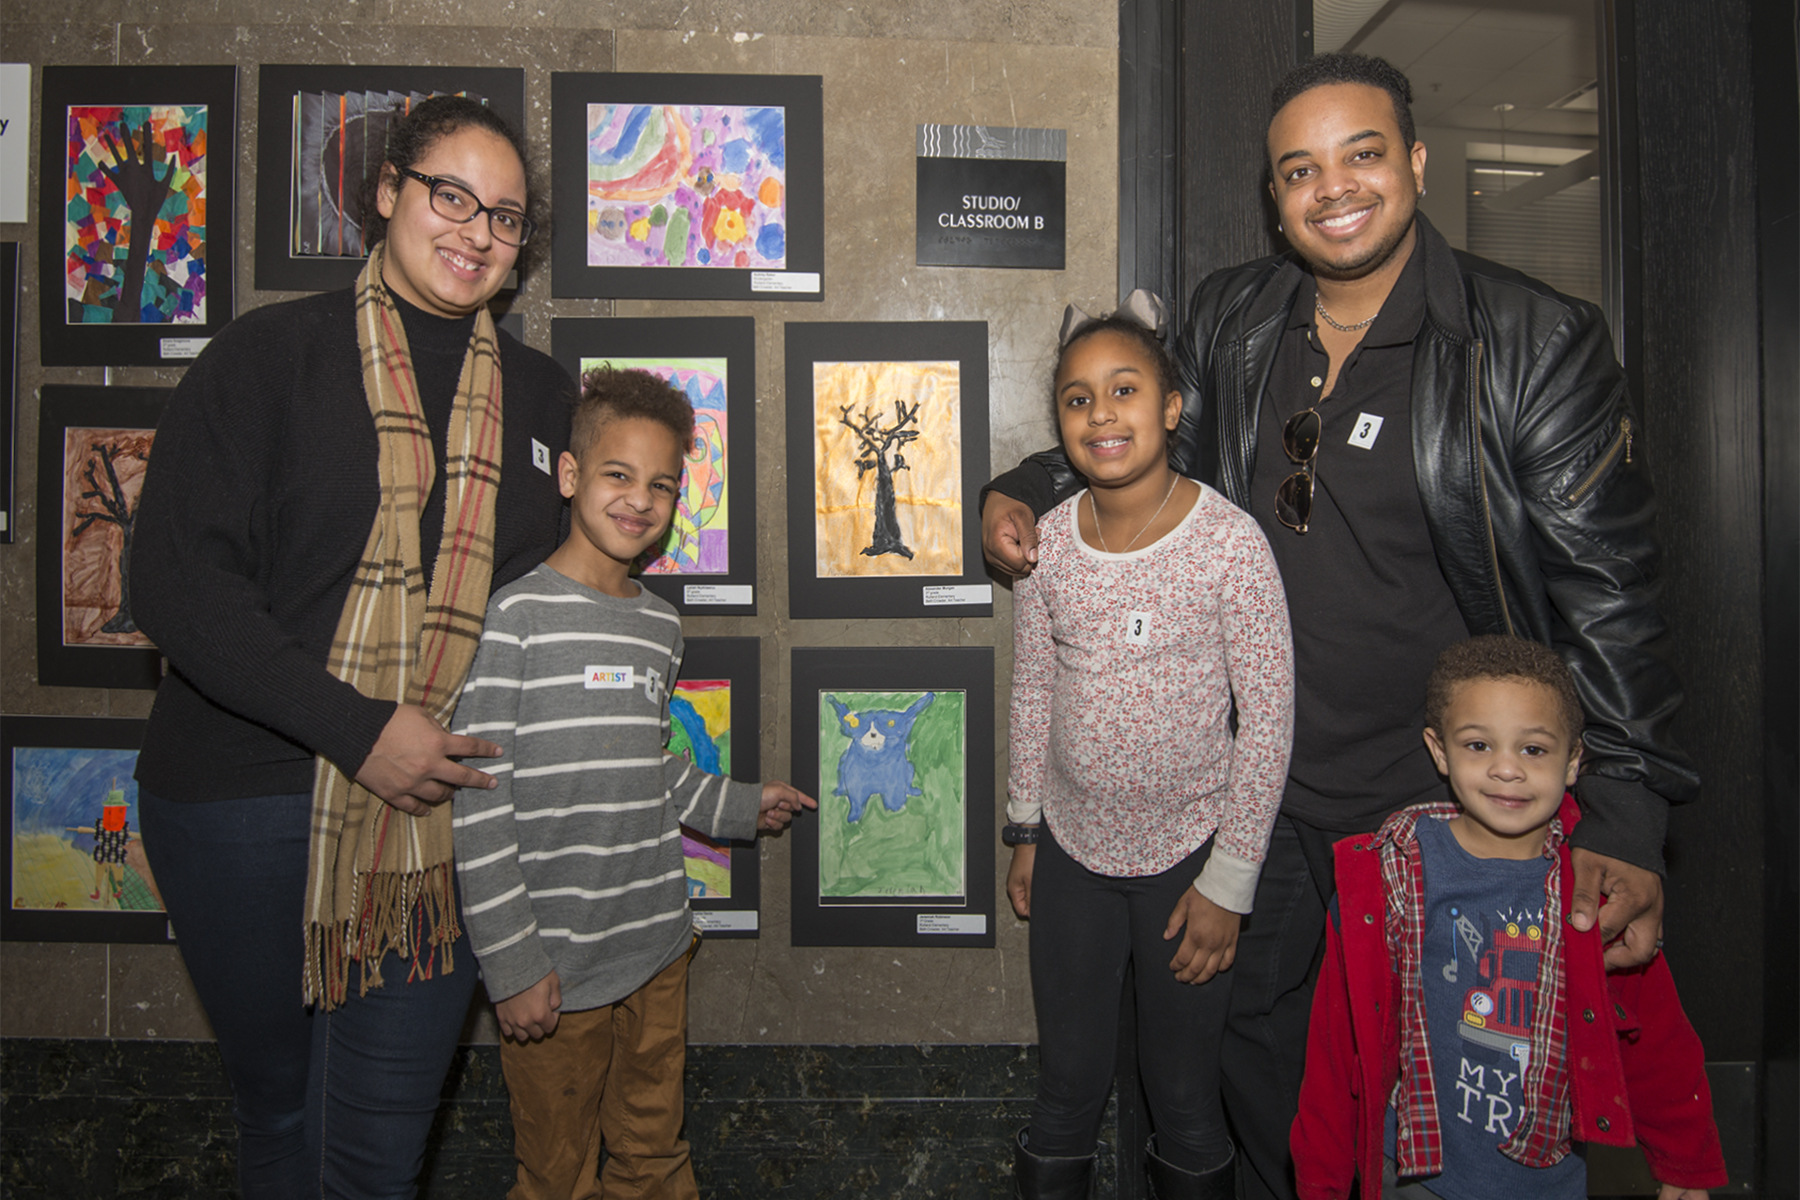 A proud young artist, standing with his parents, brother and sister, points to his blue dog painting on display at the Mayor’s Art Show at the museum.